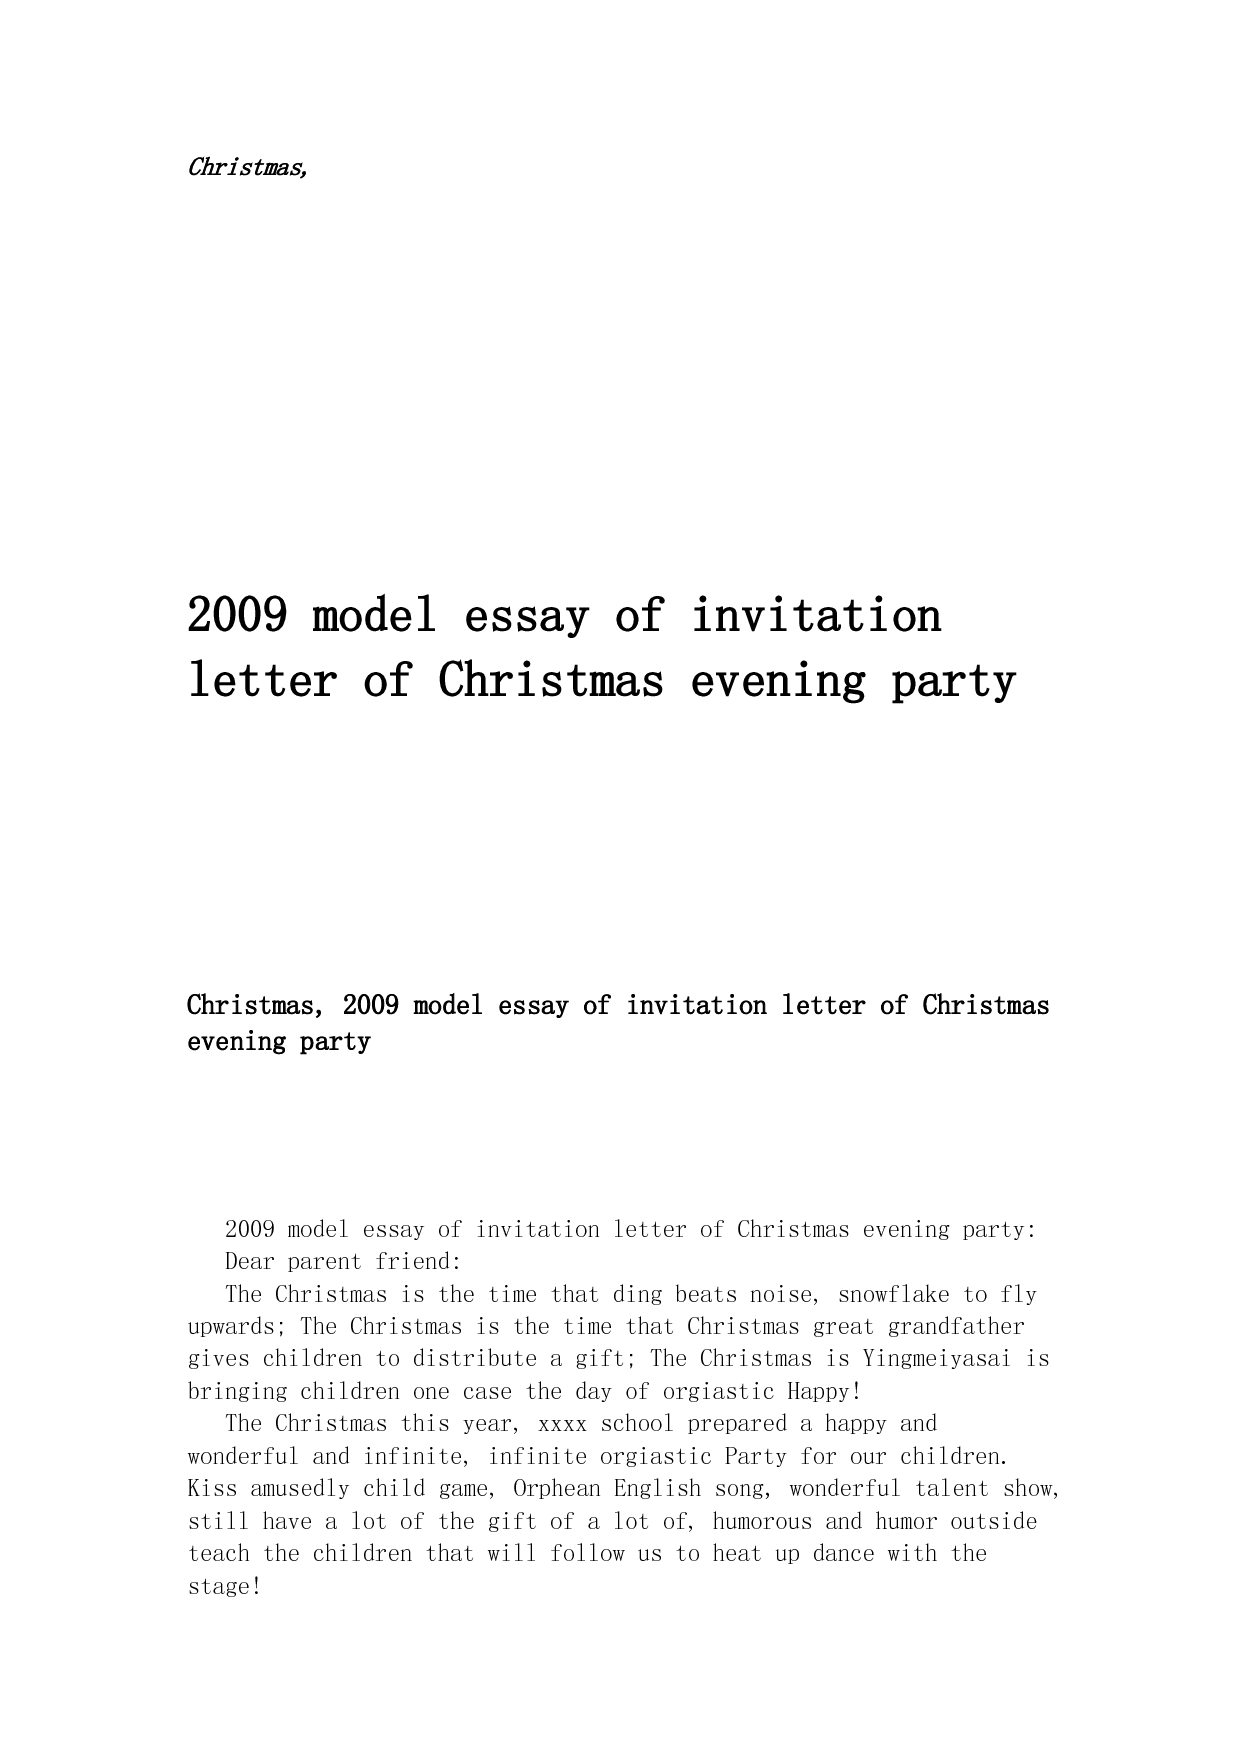 Christmas Party Letter Template - Christmas Invitation Letter Invitation for A Christmas Party or